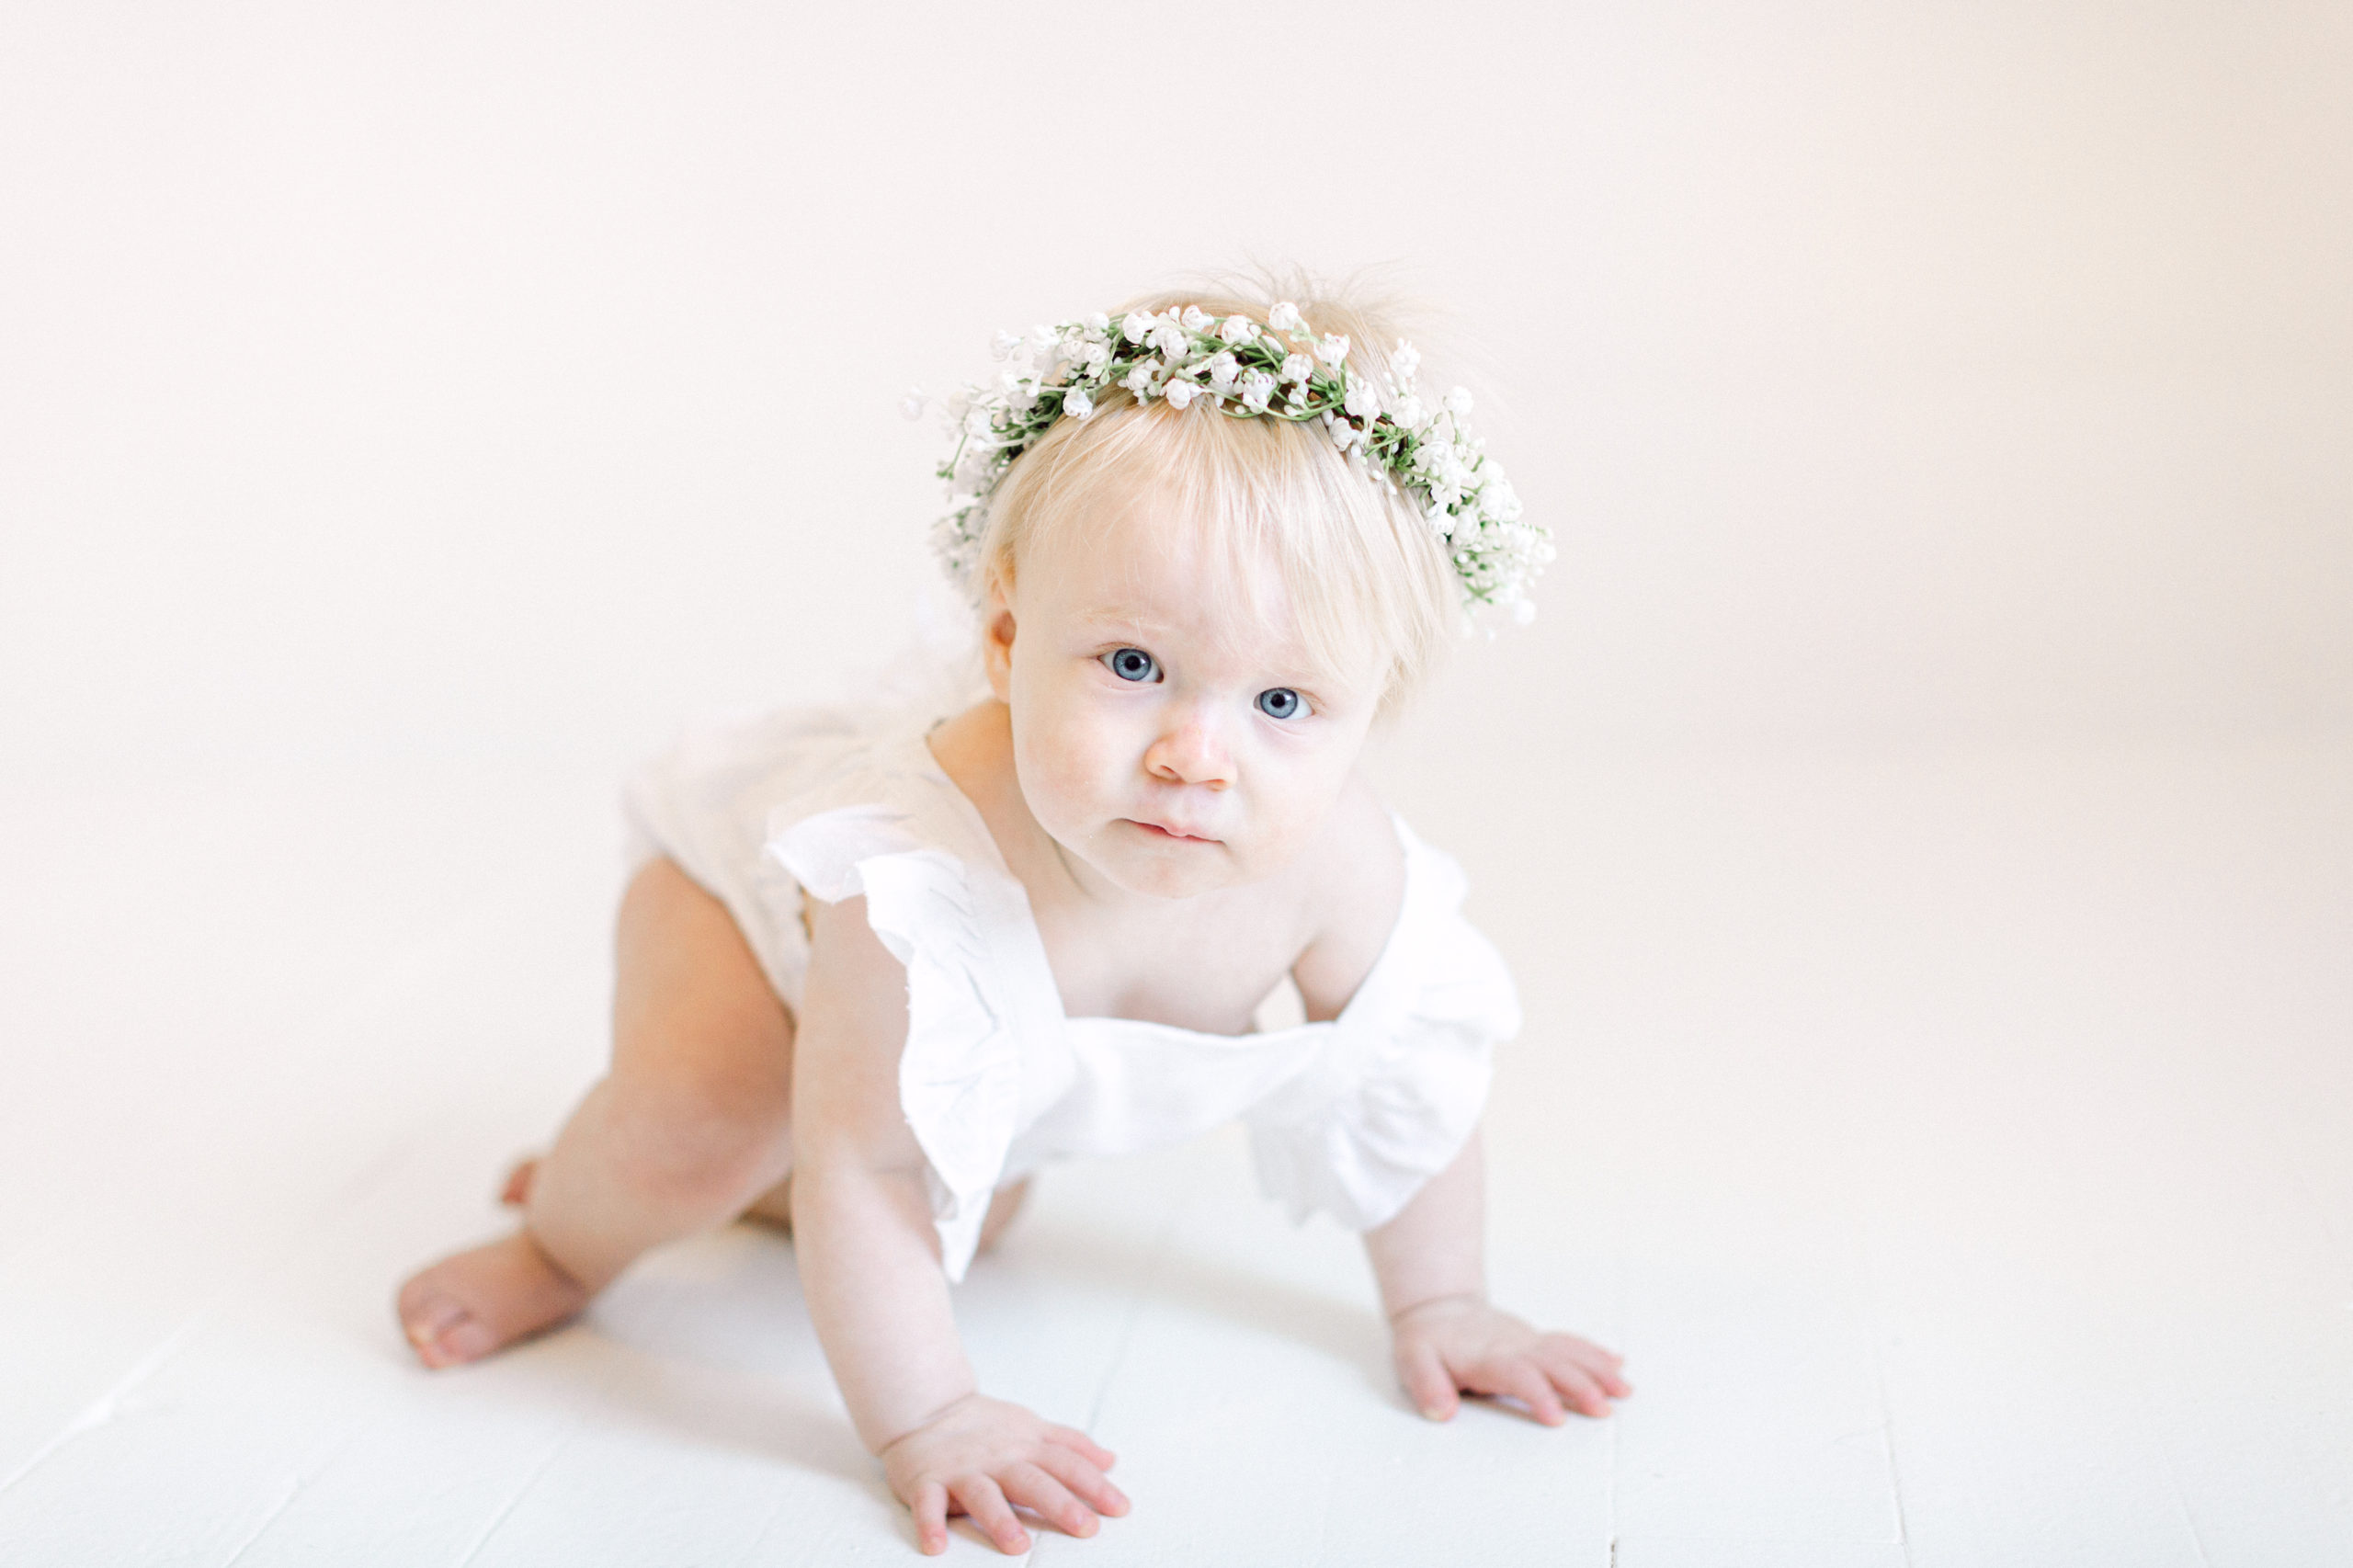 One year old girl crawling in a white romper and flower crown